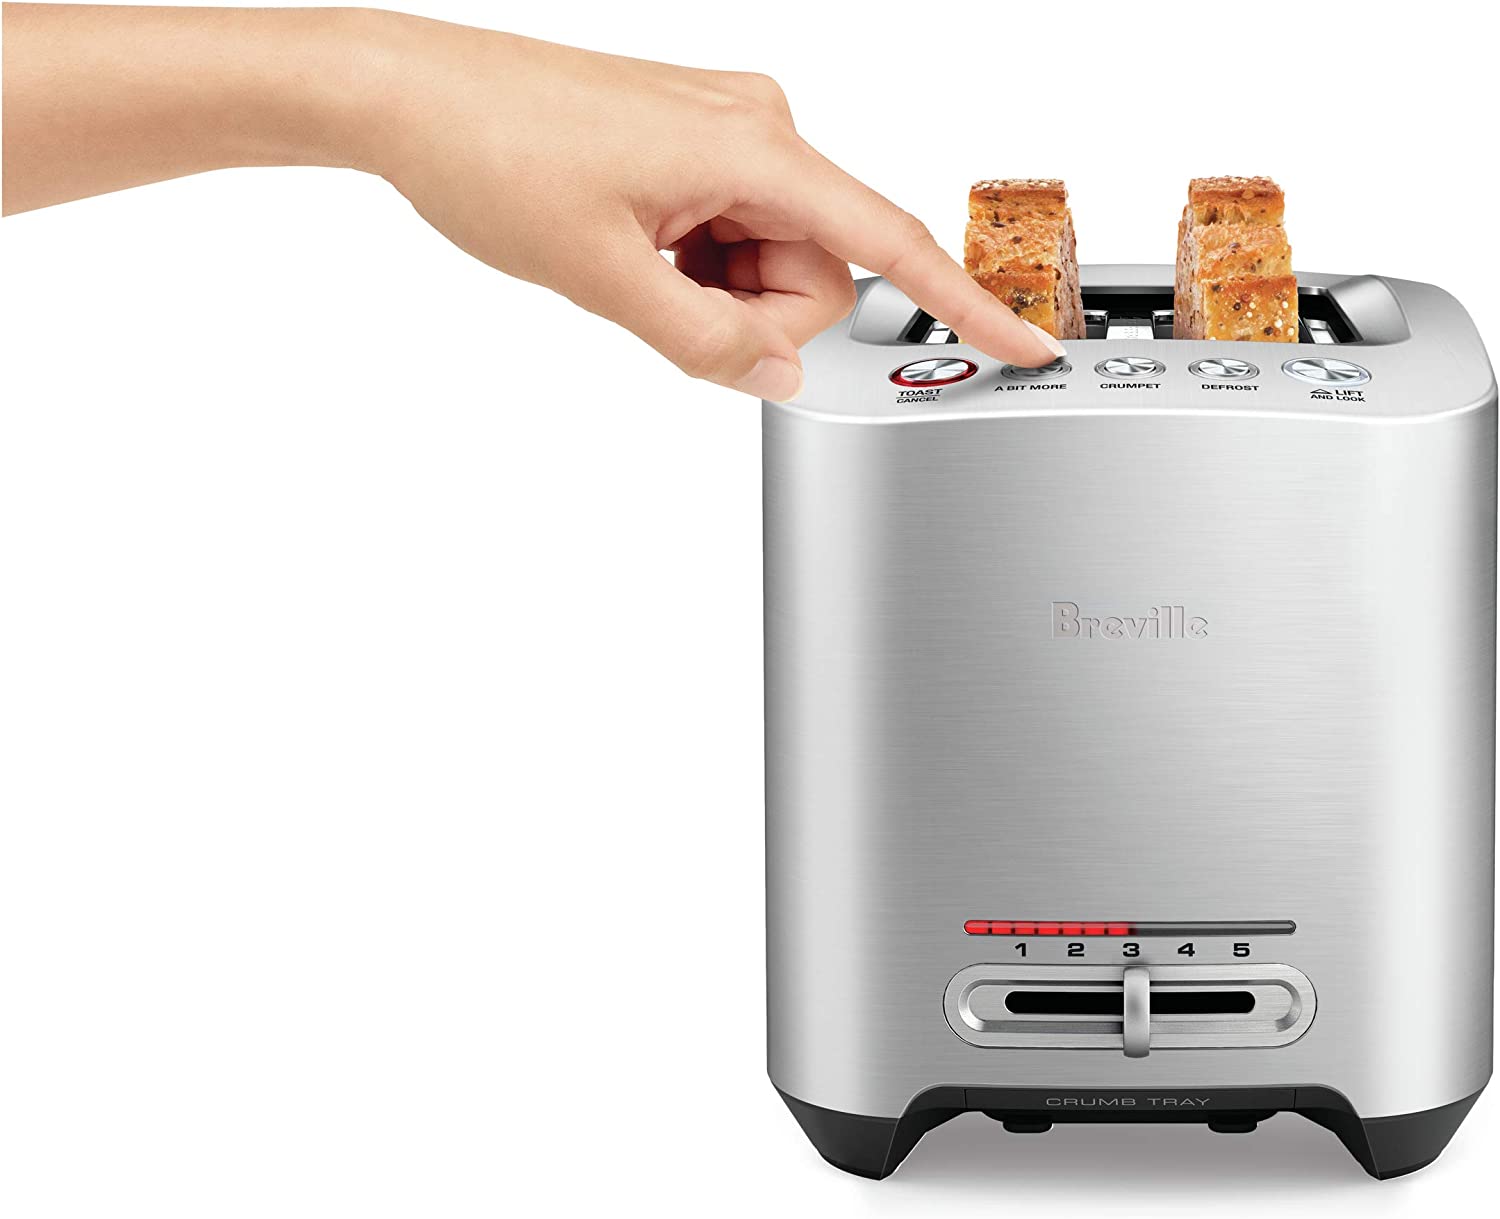 Breville BTA730XL/A Bit More 4-Slice Toaster, Brushed Stainless